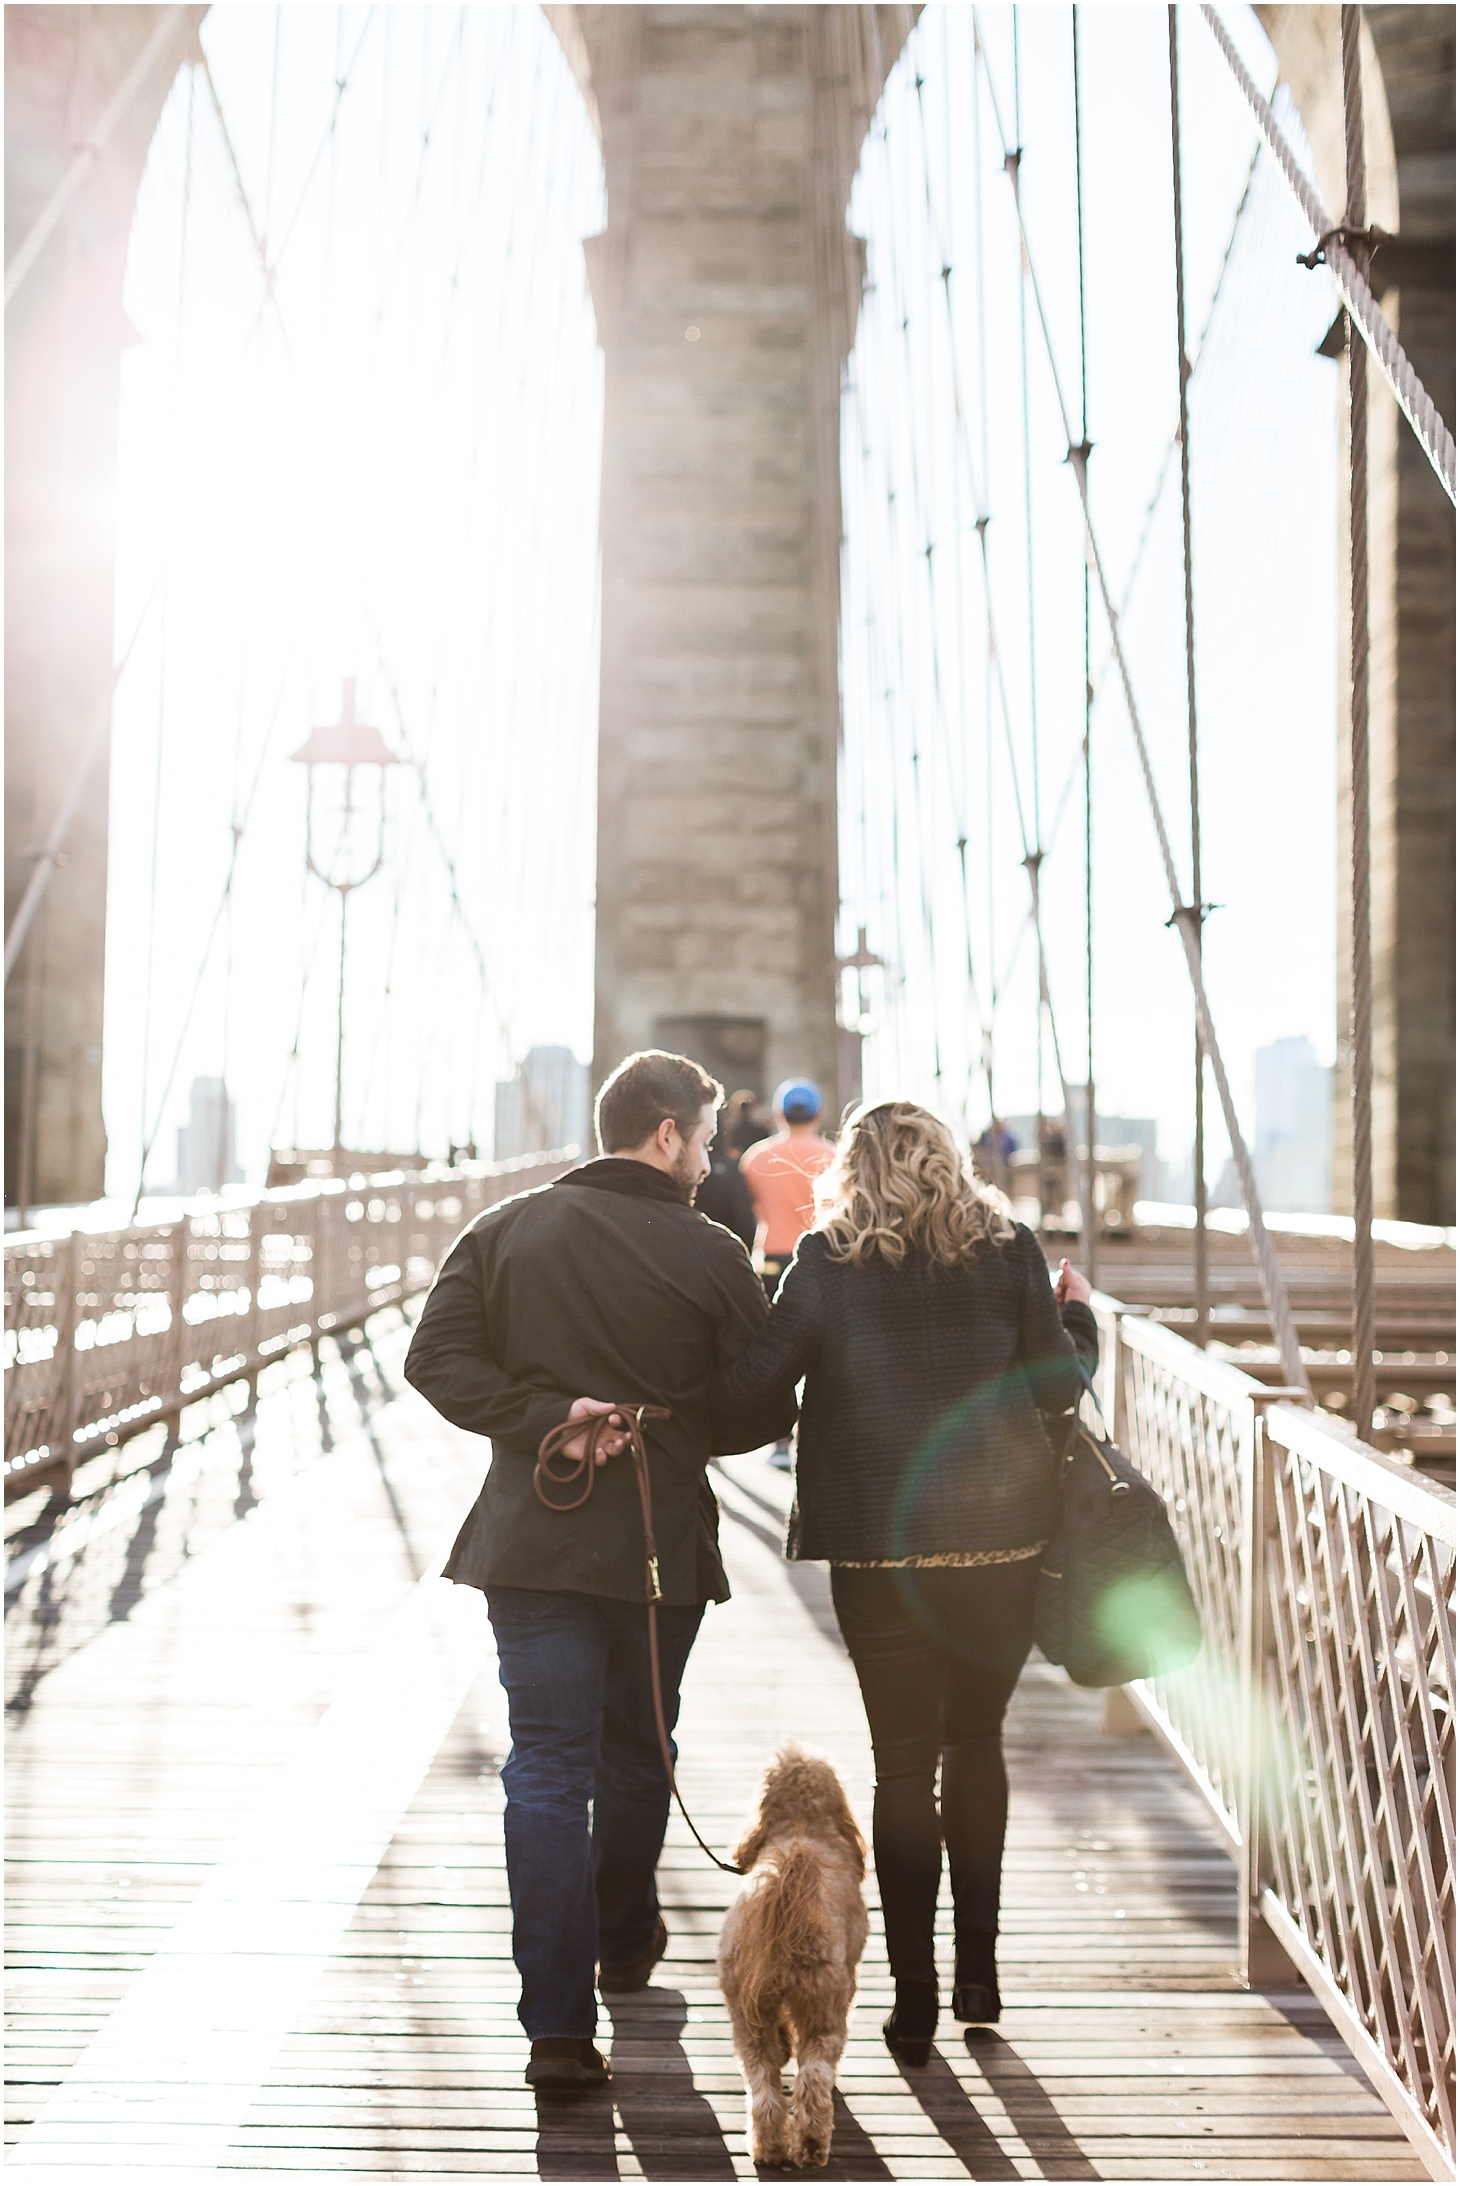 Engagement Portraits on the Brooklyn Bridge with Dog | Sunrise Engagement at the Brooklyn Bridge, Top of Rock, and Grand Central Station | Sarah Bradshaw Photography